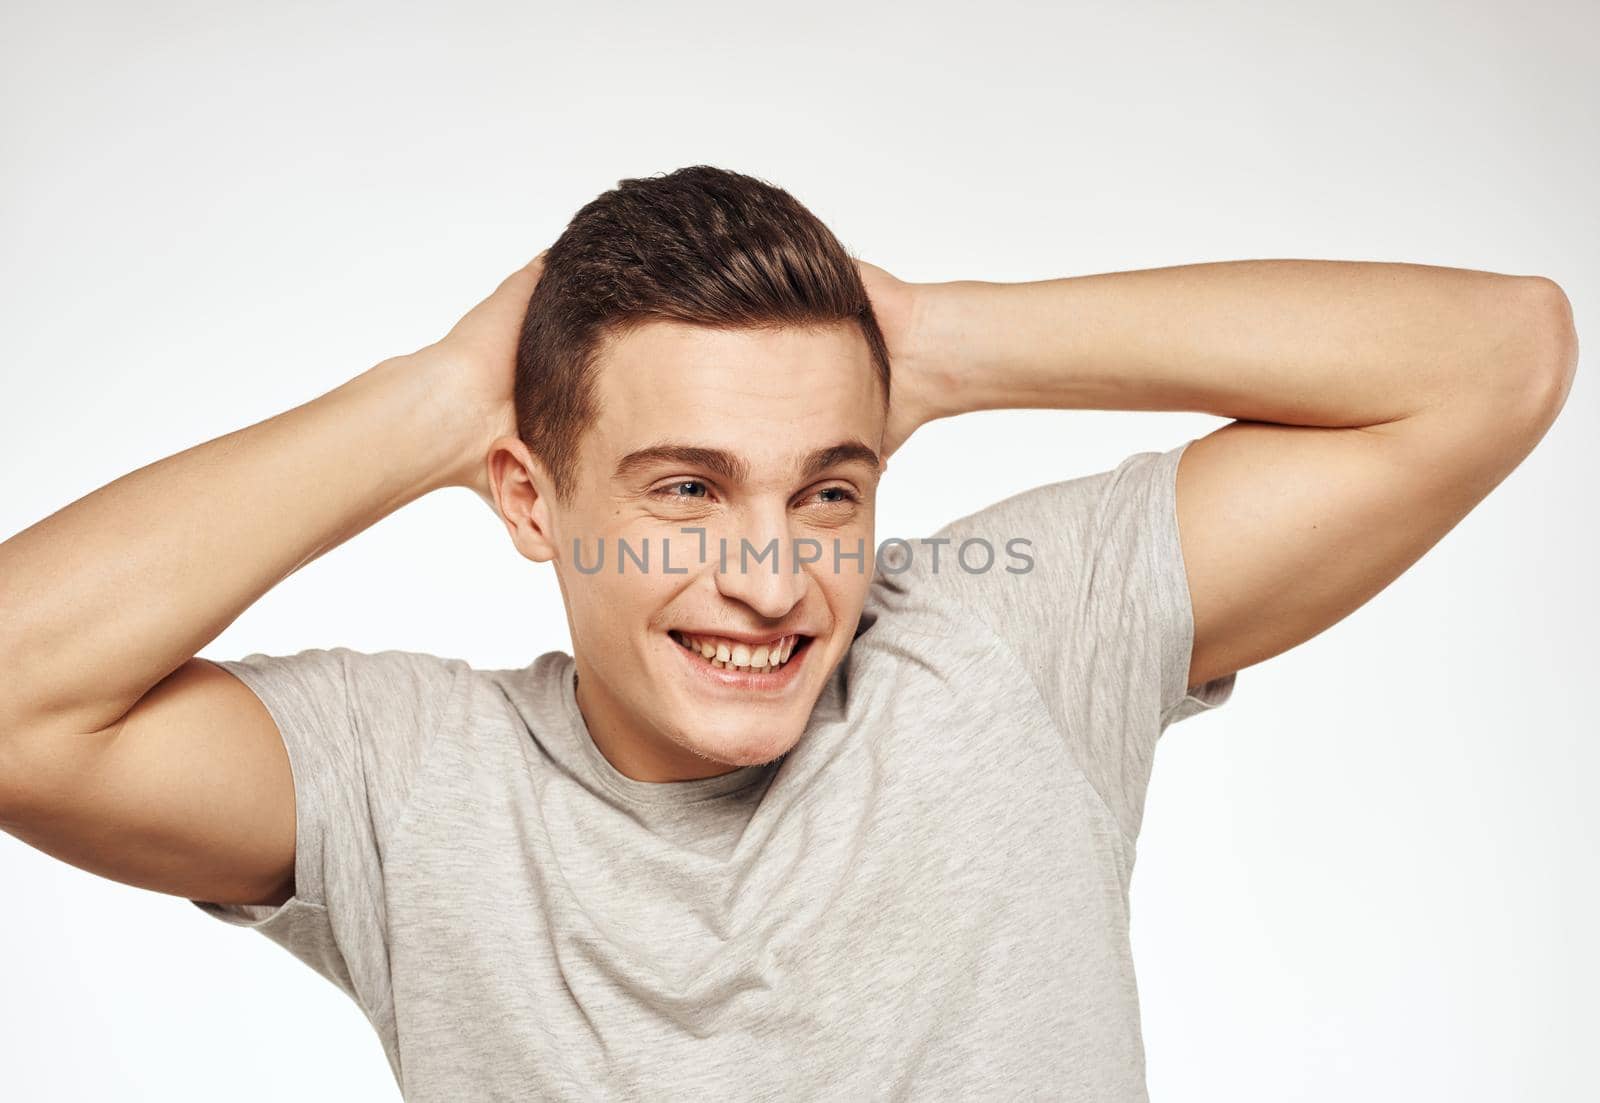 Cheerful man gesturing with his hands on a gray Studio T-shirt. High quality photo